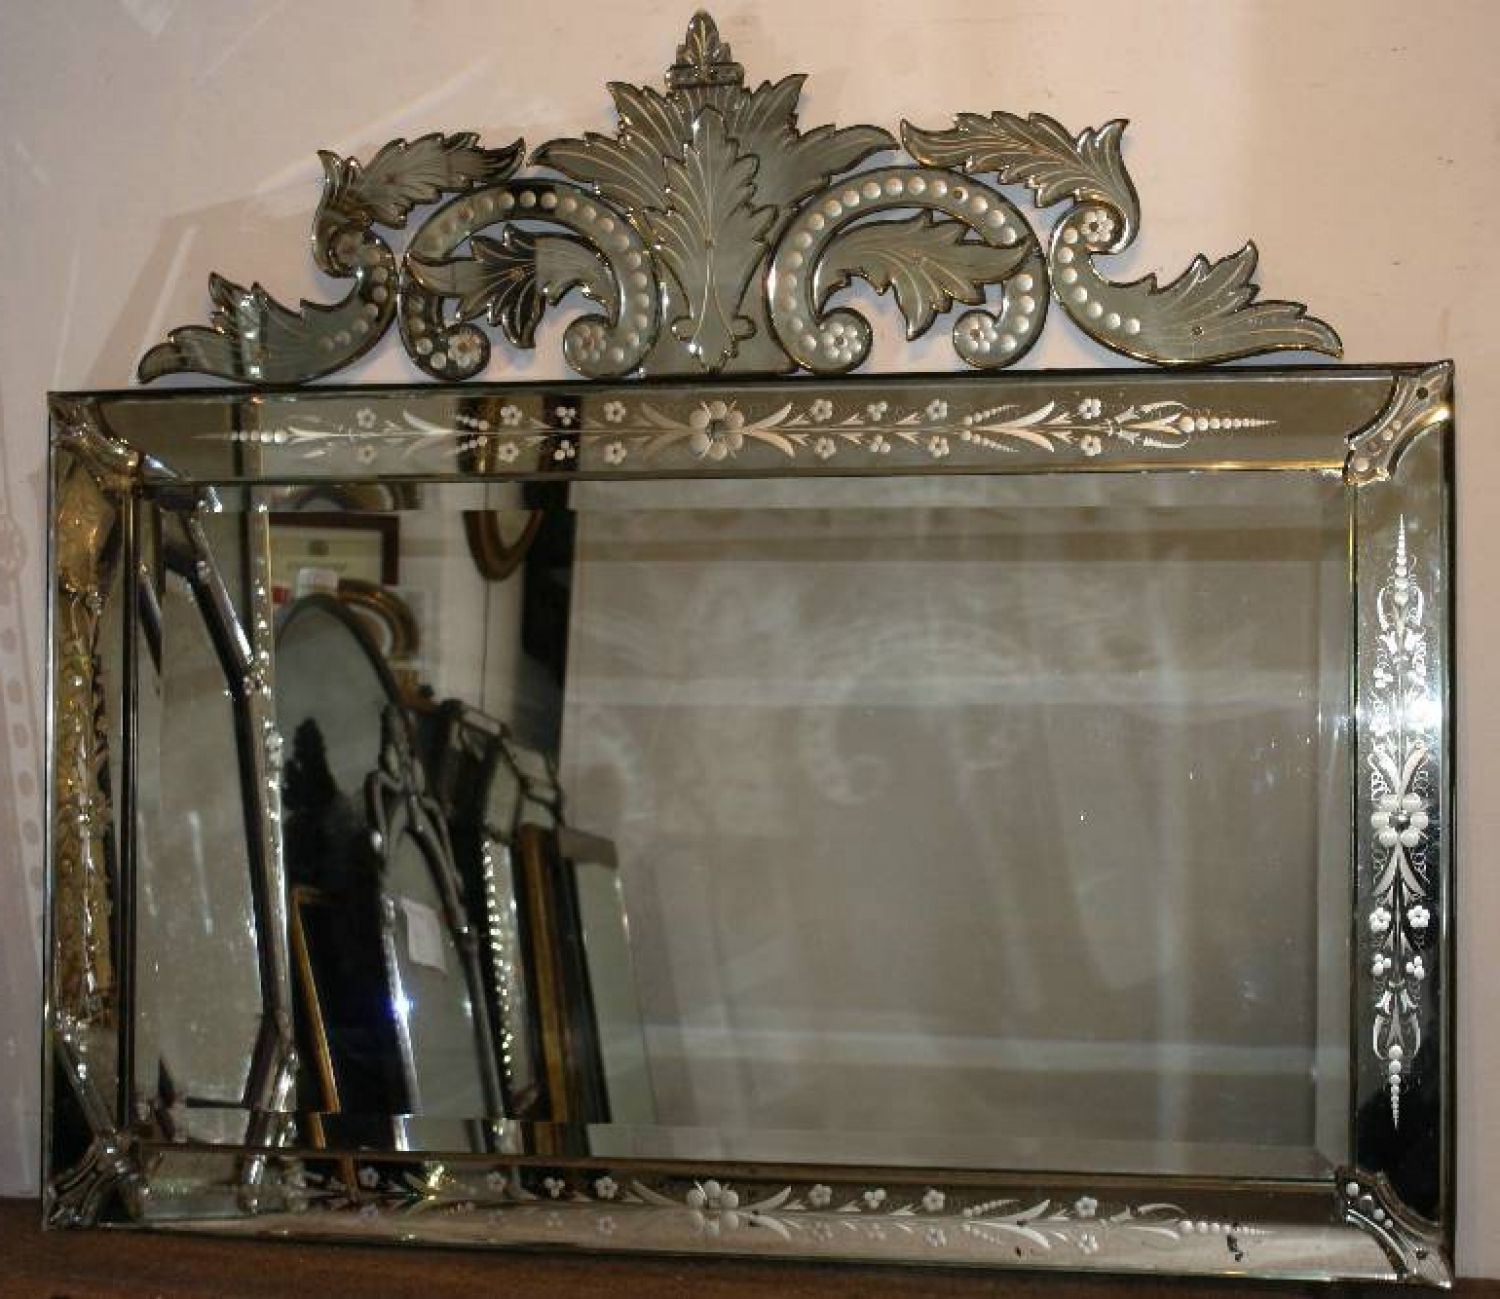 Most Current Interior: Vintage Venetian Mirror For Classic Interior Decor Intended For Asian Inspired Wall Mirrors (View 20 of 20)